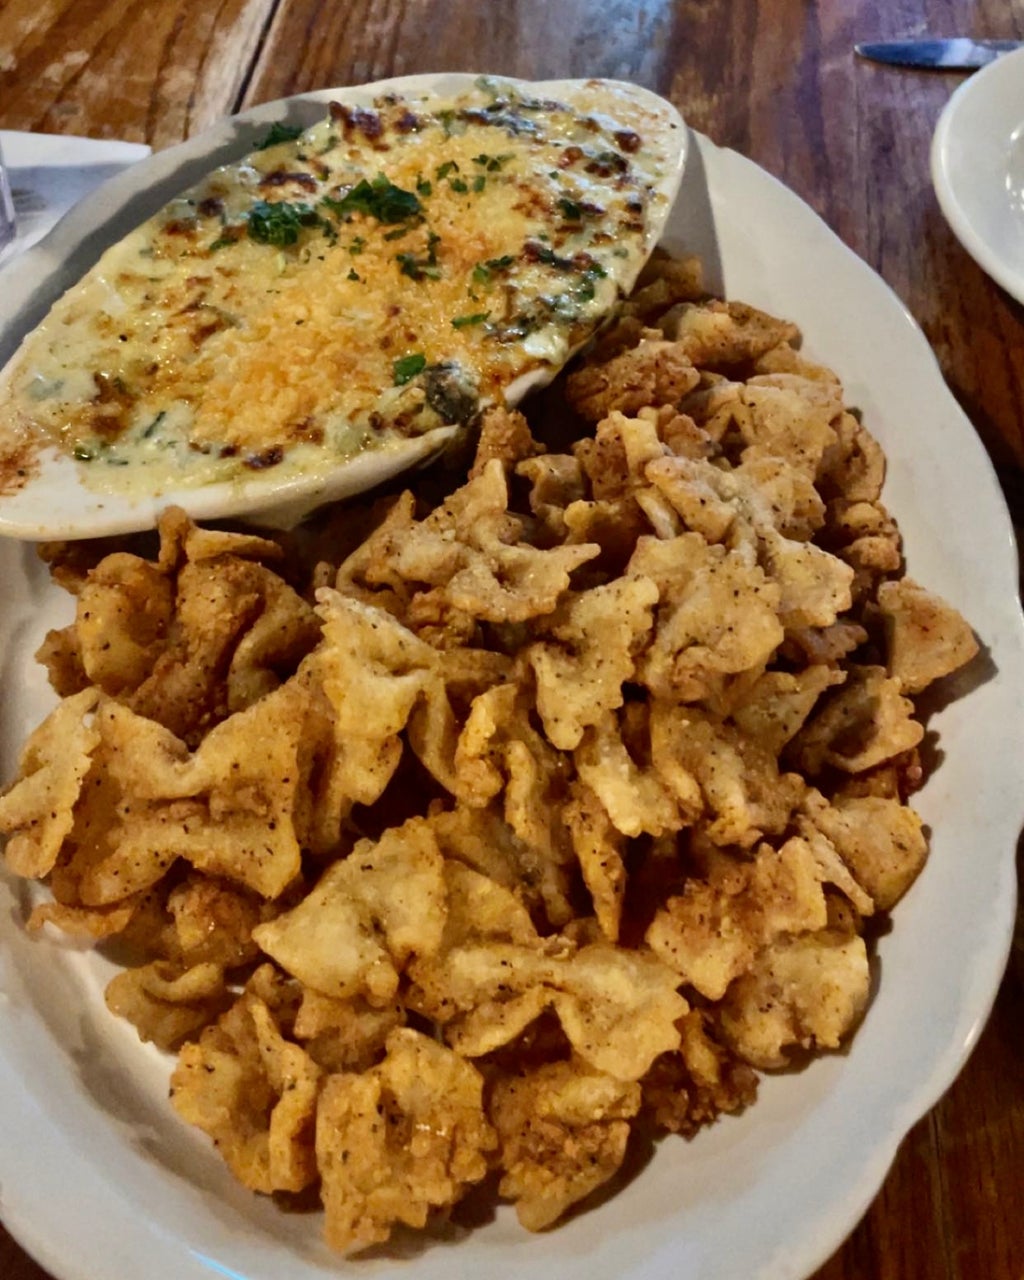 Spinach and Artichoke Dip from The Chimes.